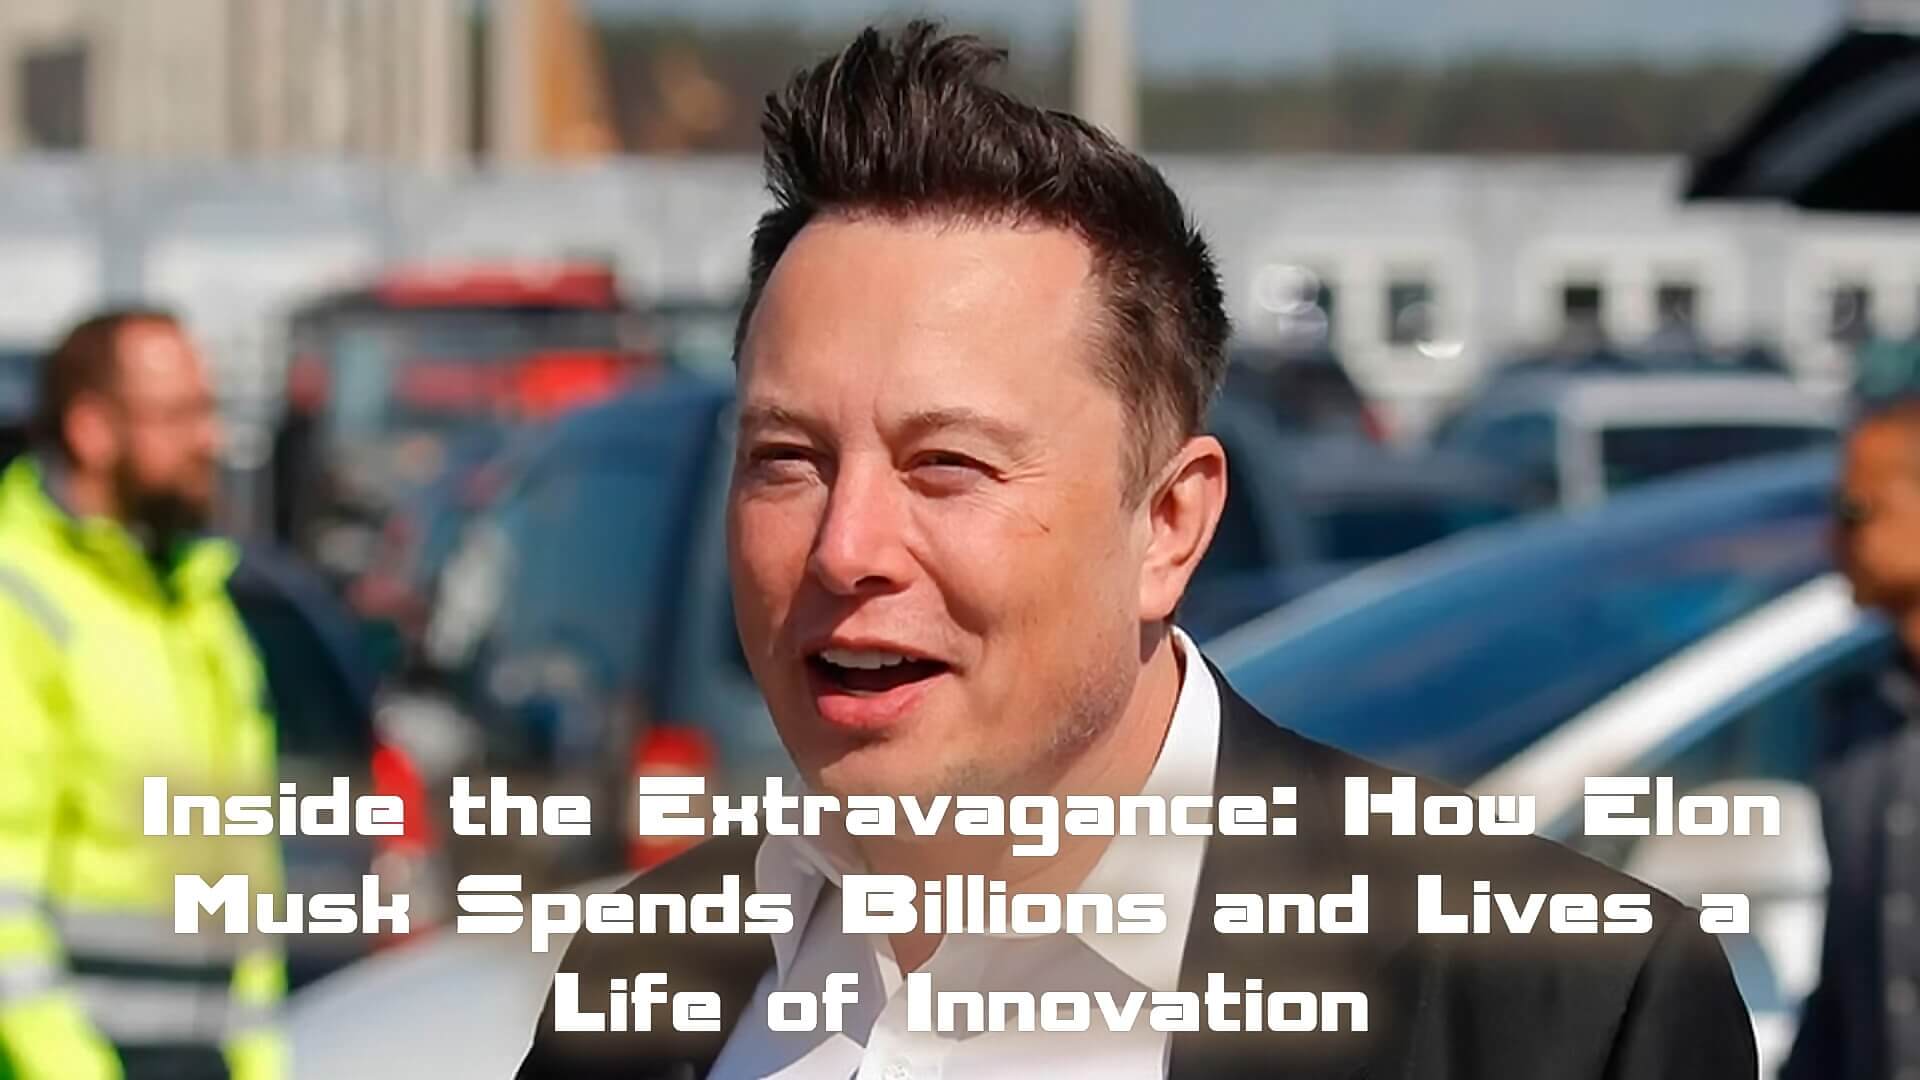 How Elon Musk Spends Billions and Lives a Life of Innovation